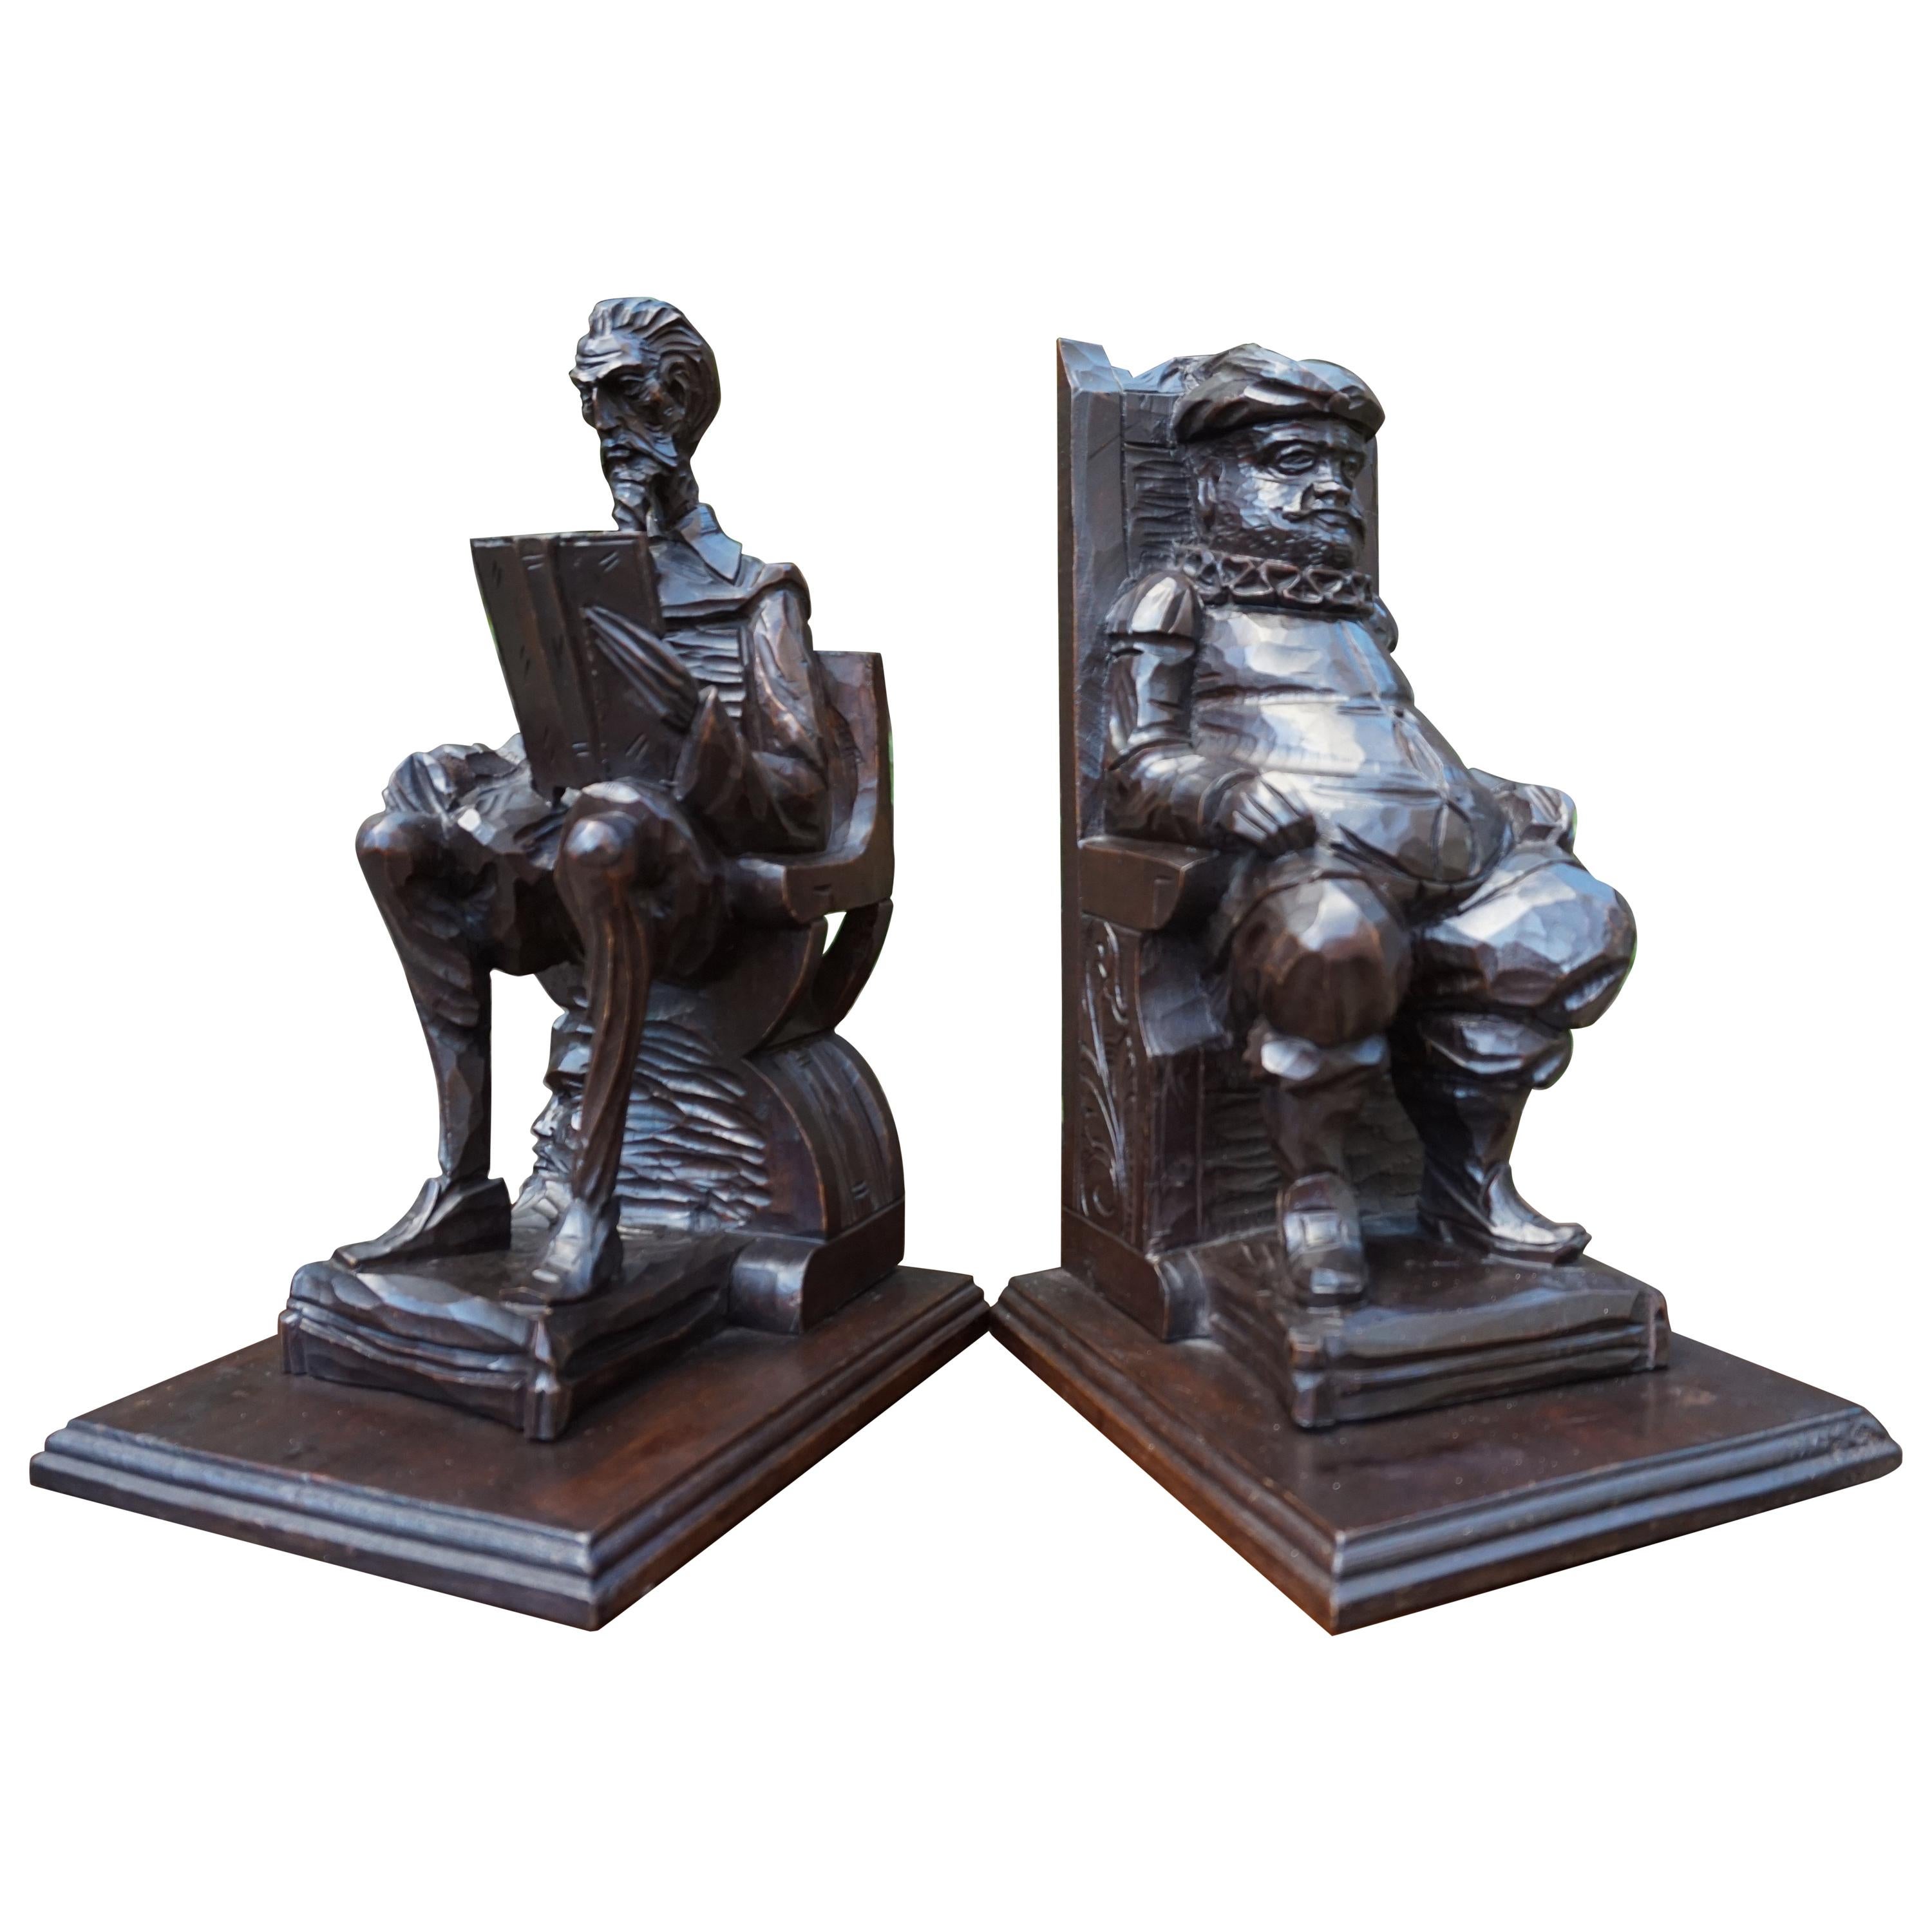 Large Pair of Hand-Carved and Ebonized 1930s Don Quixote & Sancho Panza Bookends